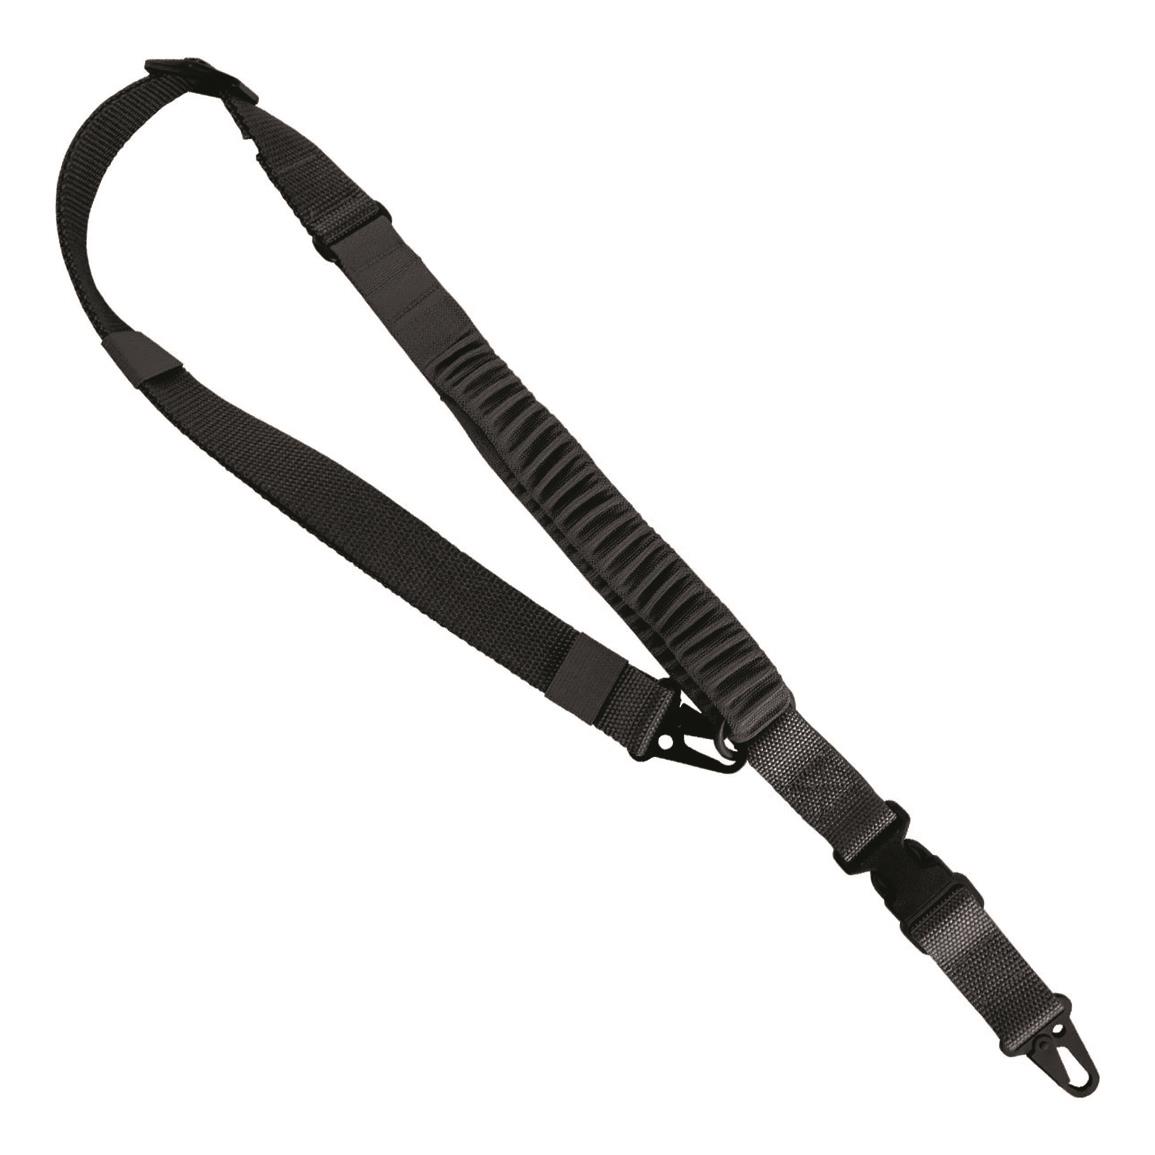 United States Tactical C4 2 to 1 Point Shock Webbing Sling, Black